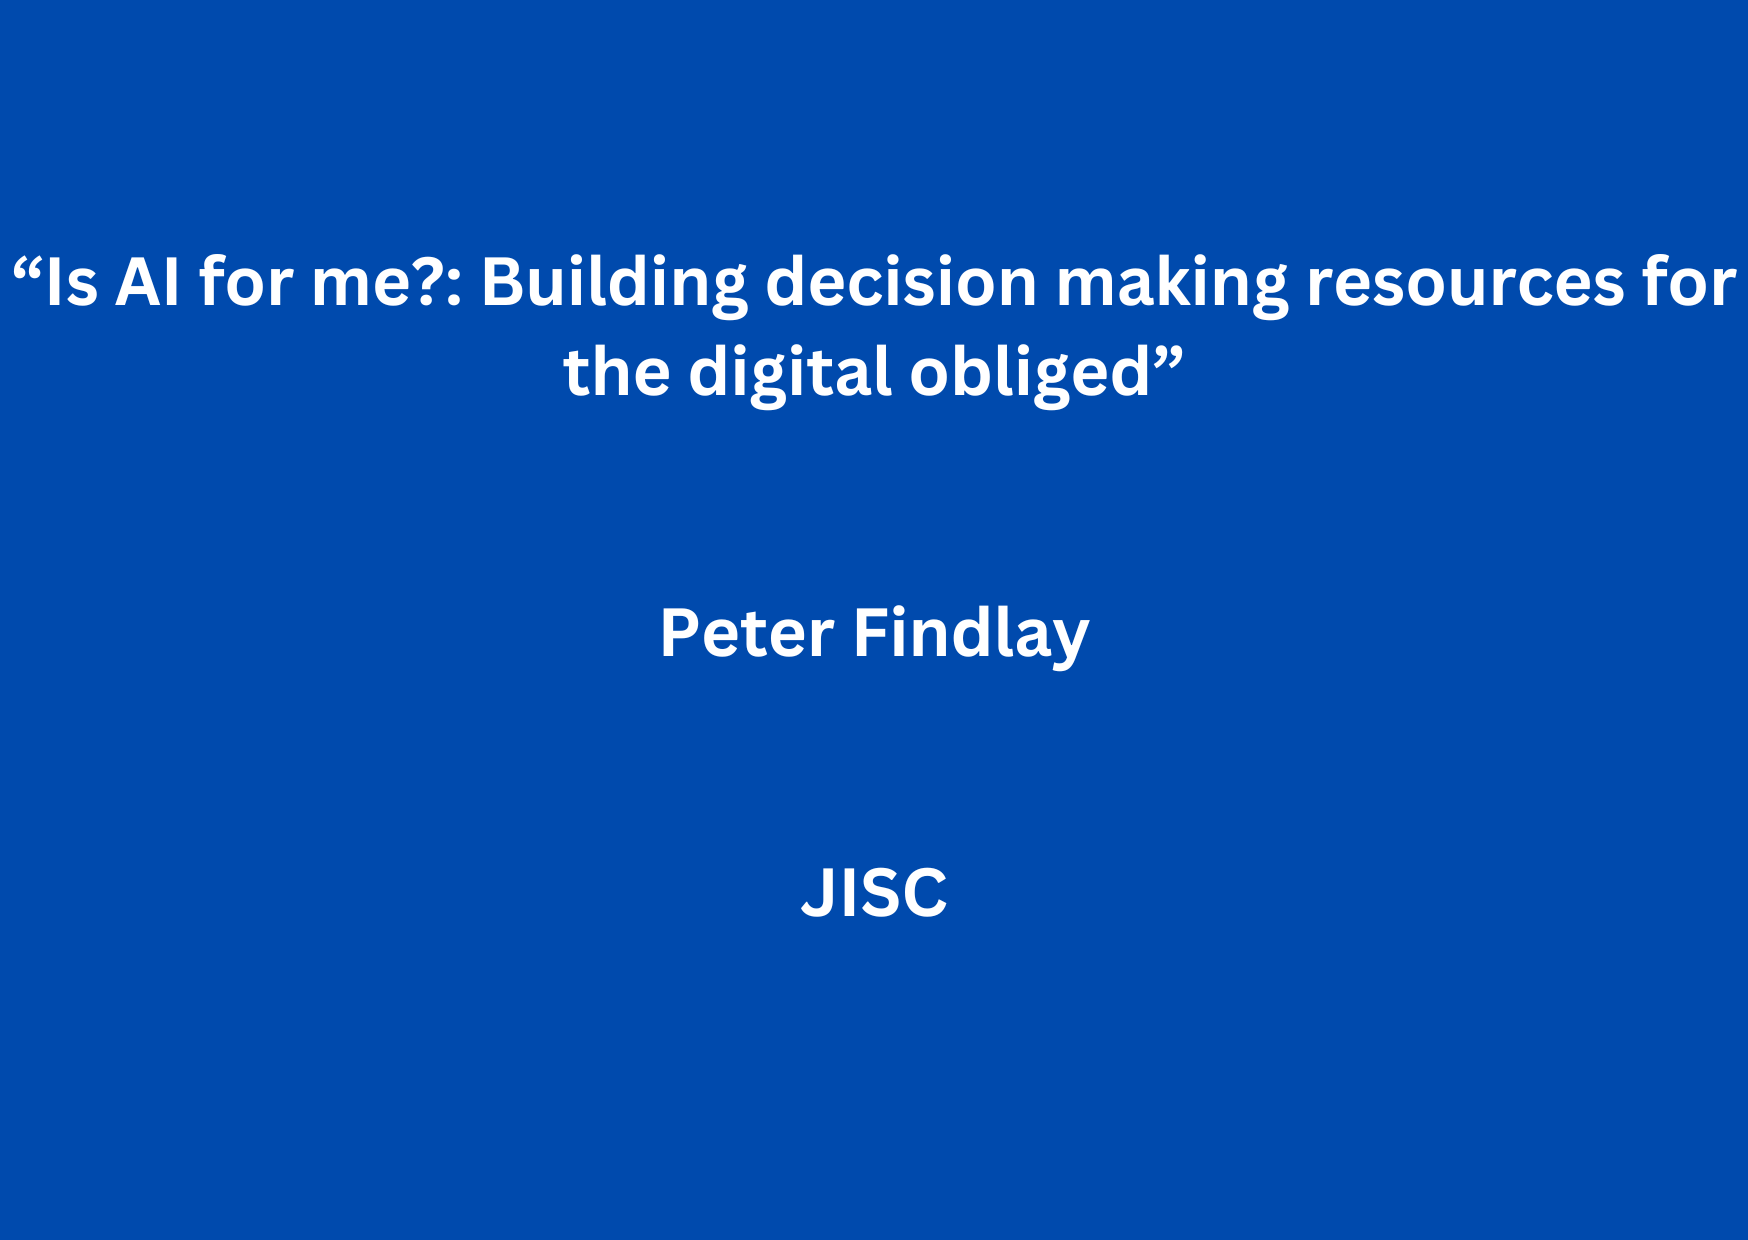 AEOLIAN Workshop 6: “Is AI for me?: Building decision making resources for the digital obliged” by Peter Findlay (JISC)